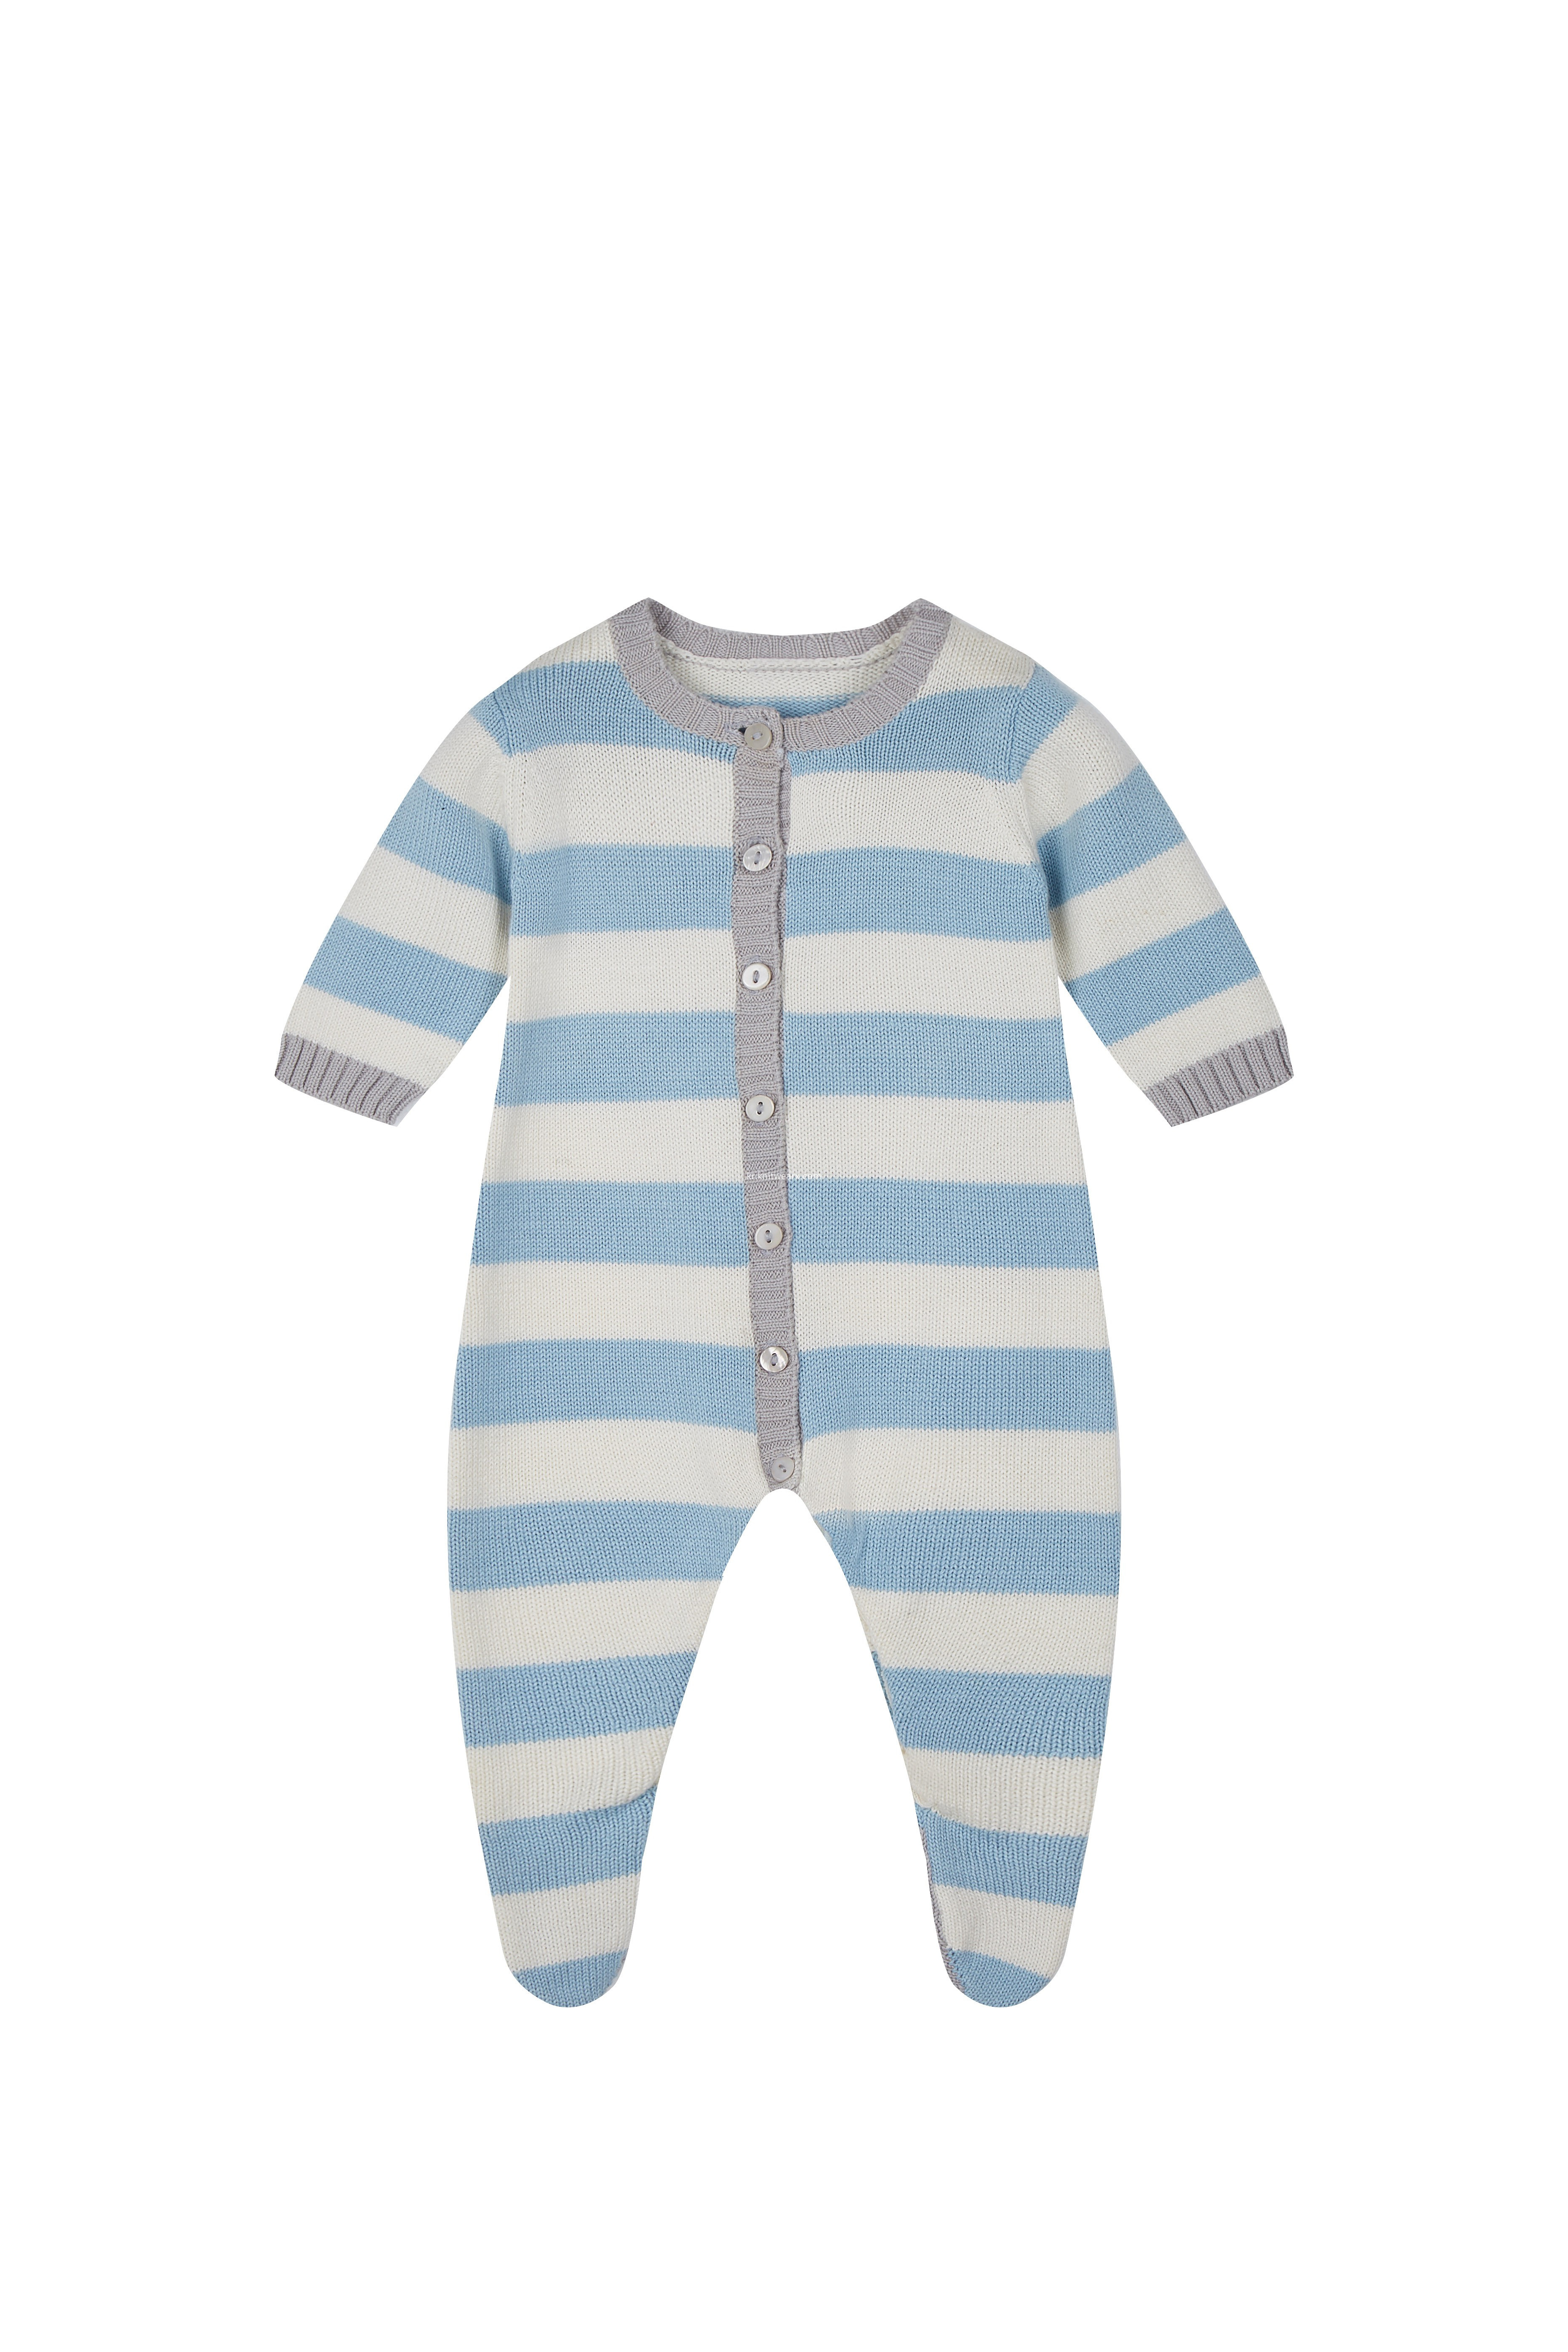 Boy's Girl's Knitted Stripe Buttoned Baby Romper